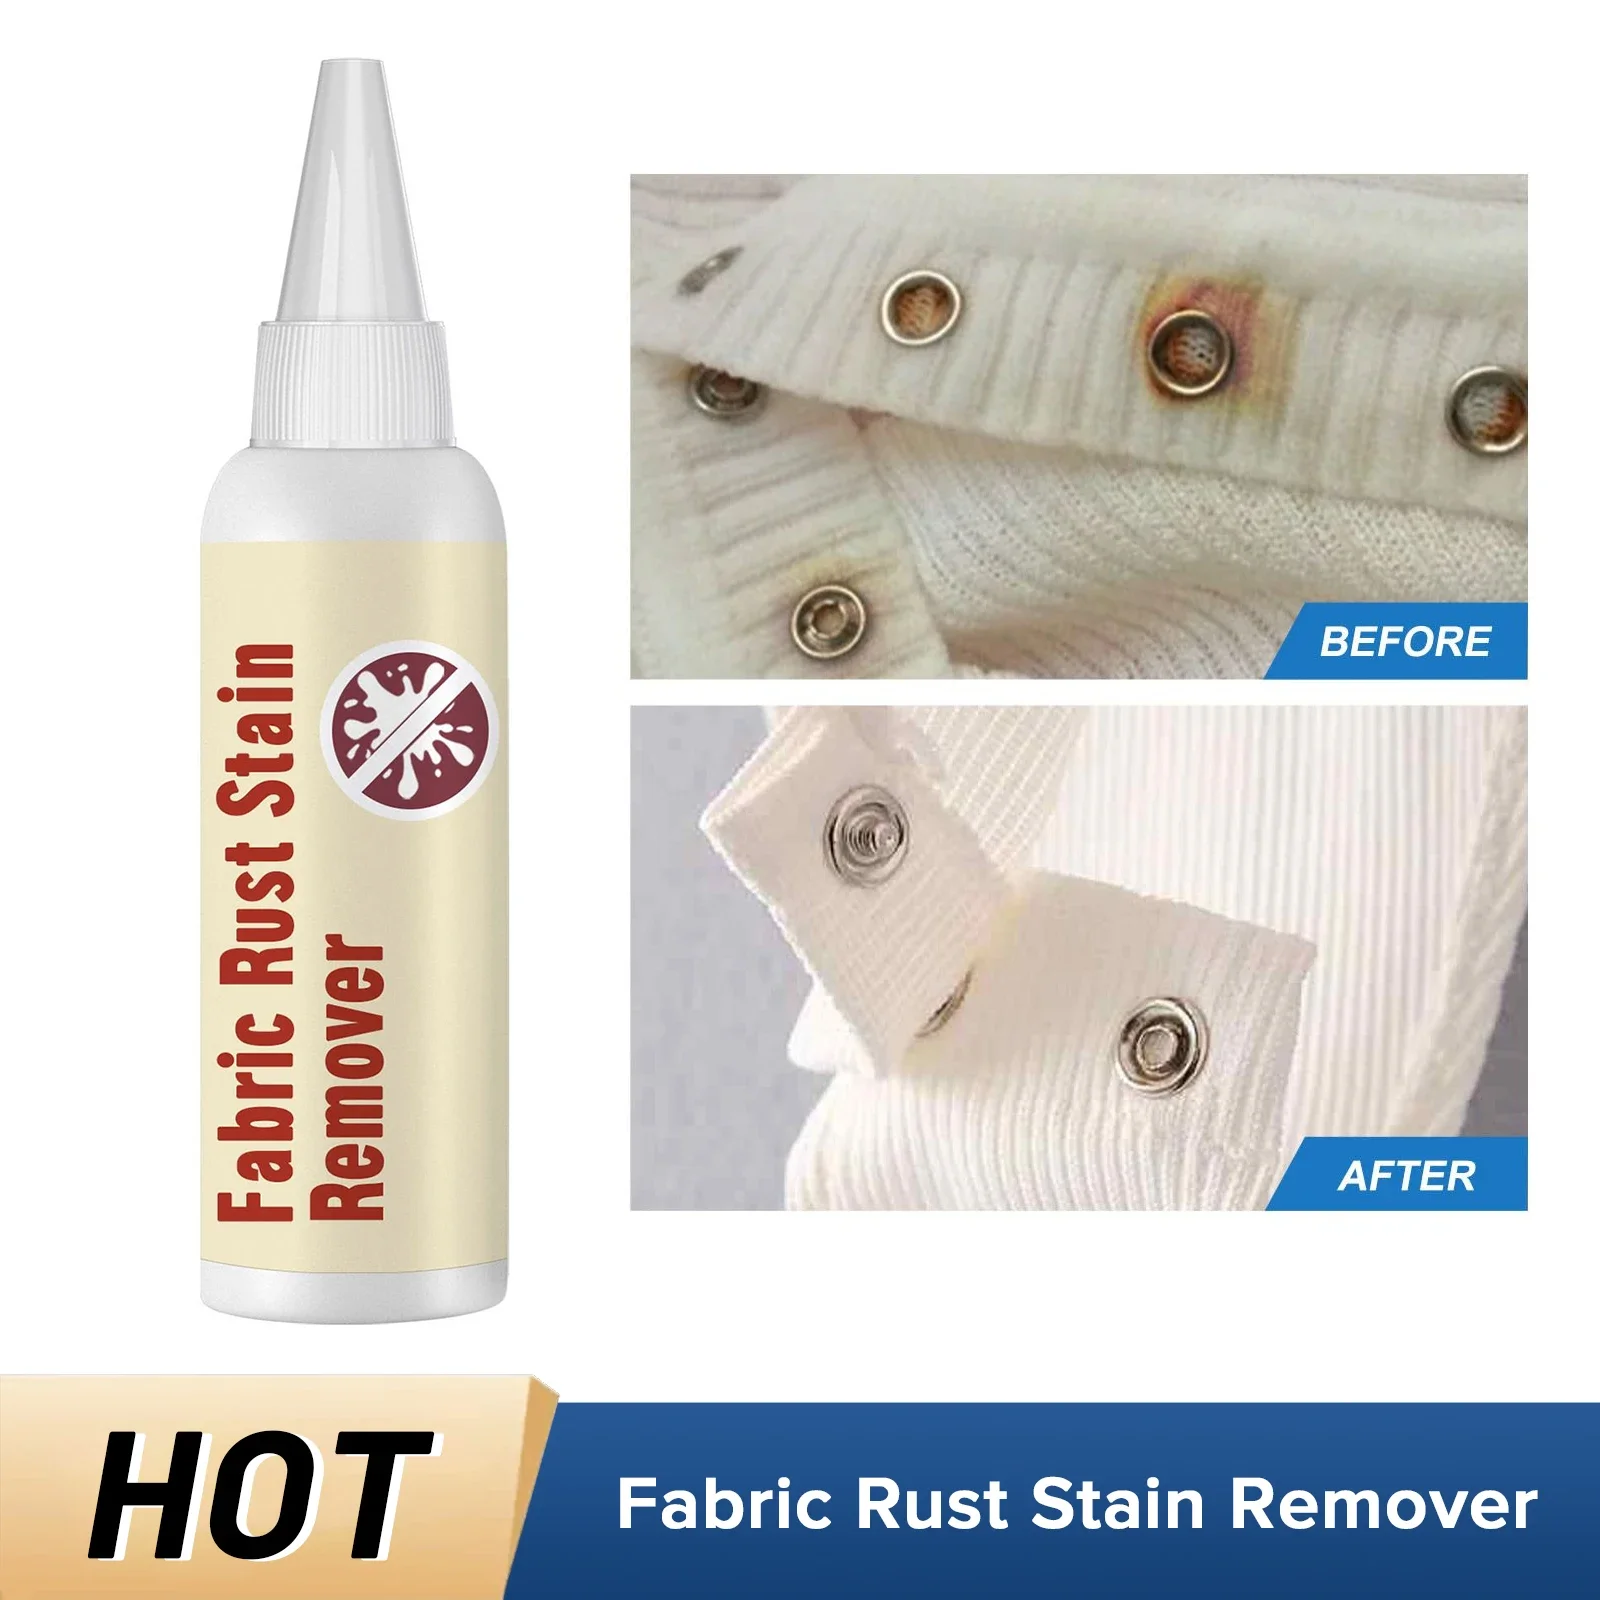 Fabric Rust Stain Remover Waterless Clothing Cleansing Agent Dirt Removal Powerful Decontamination Multi-purpose Clothes Cleaner